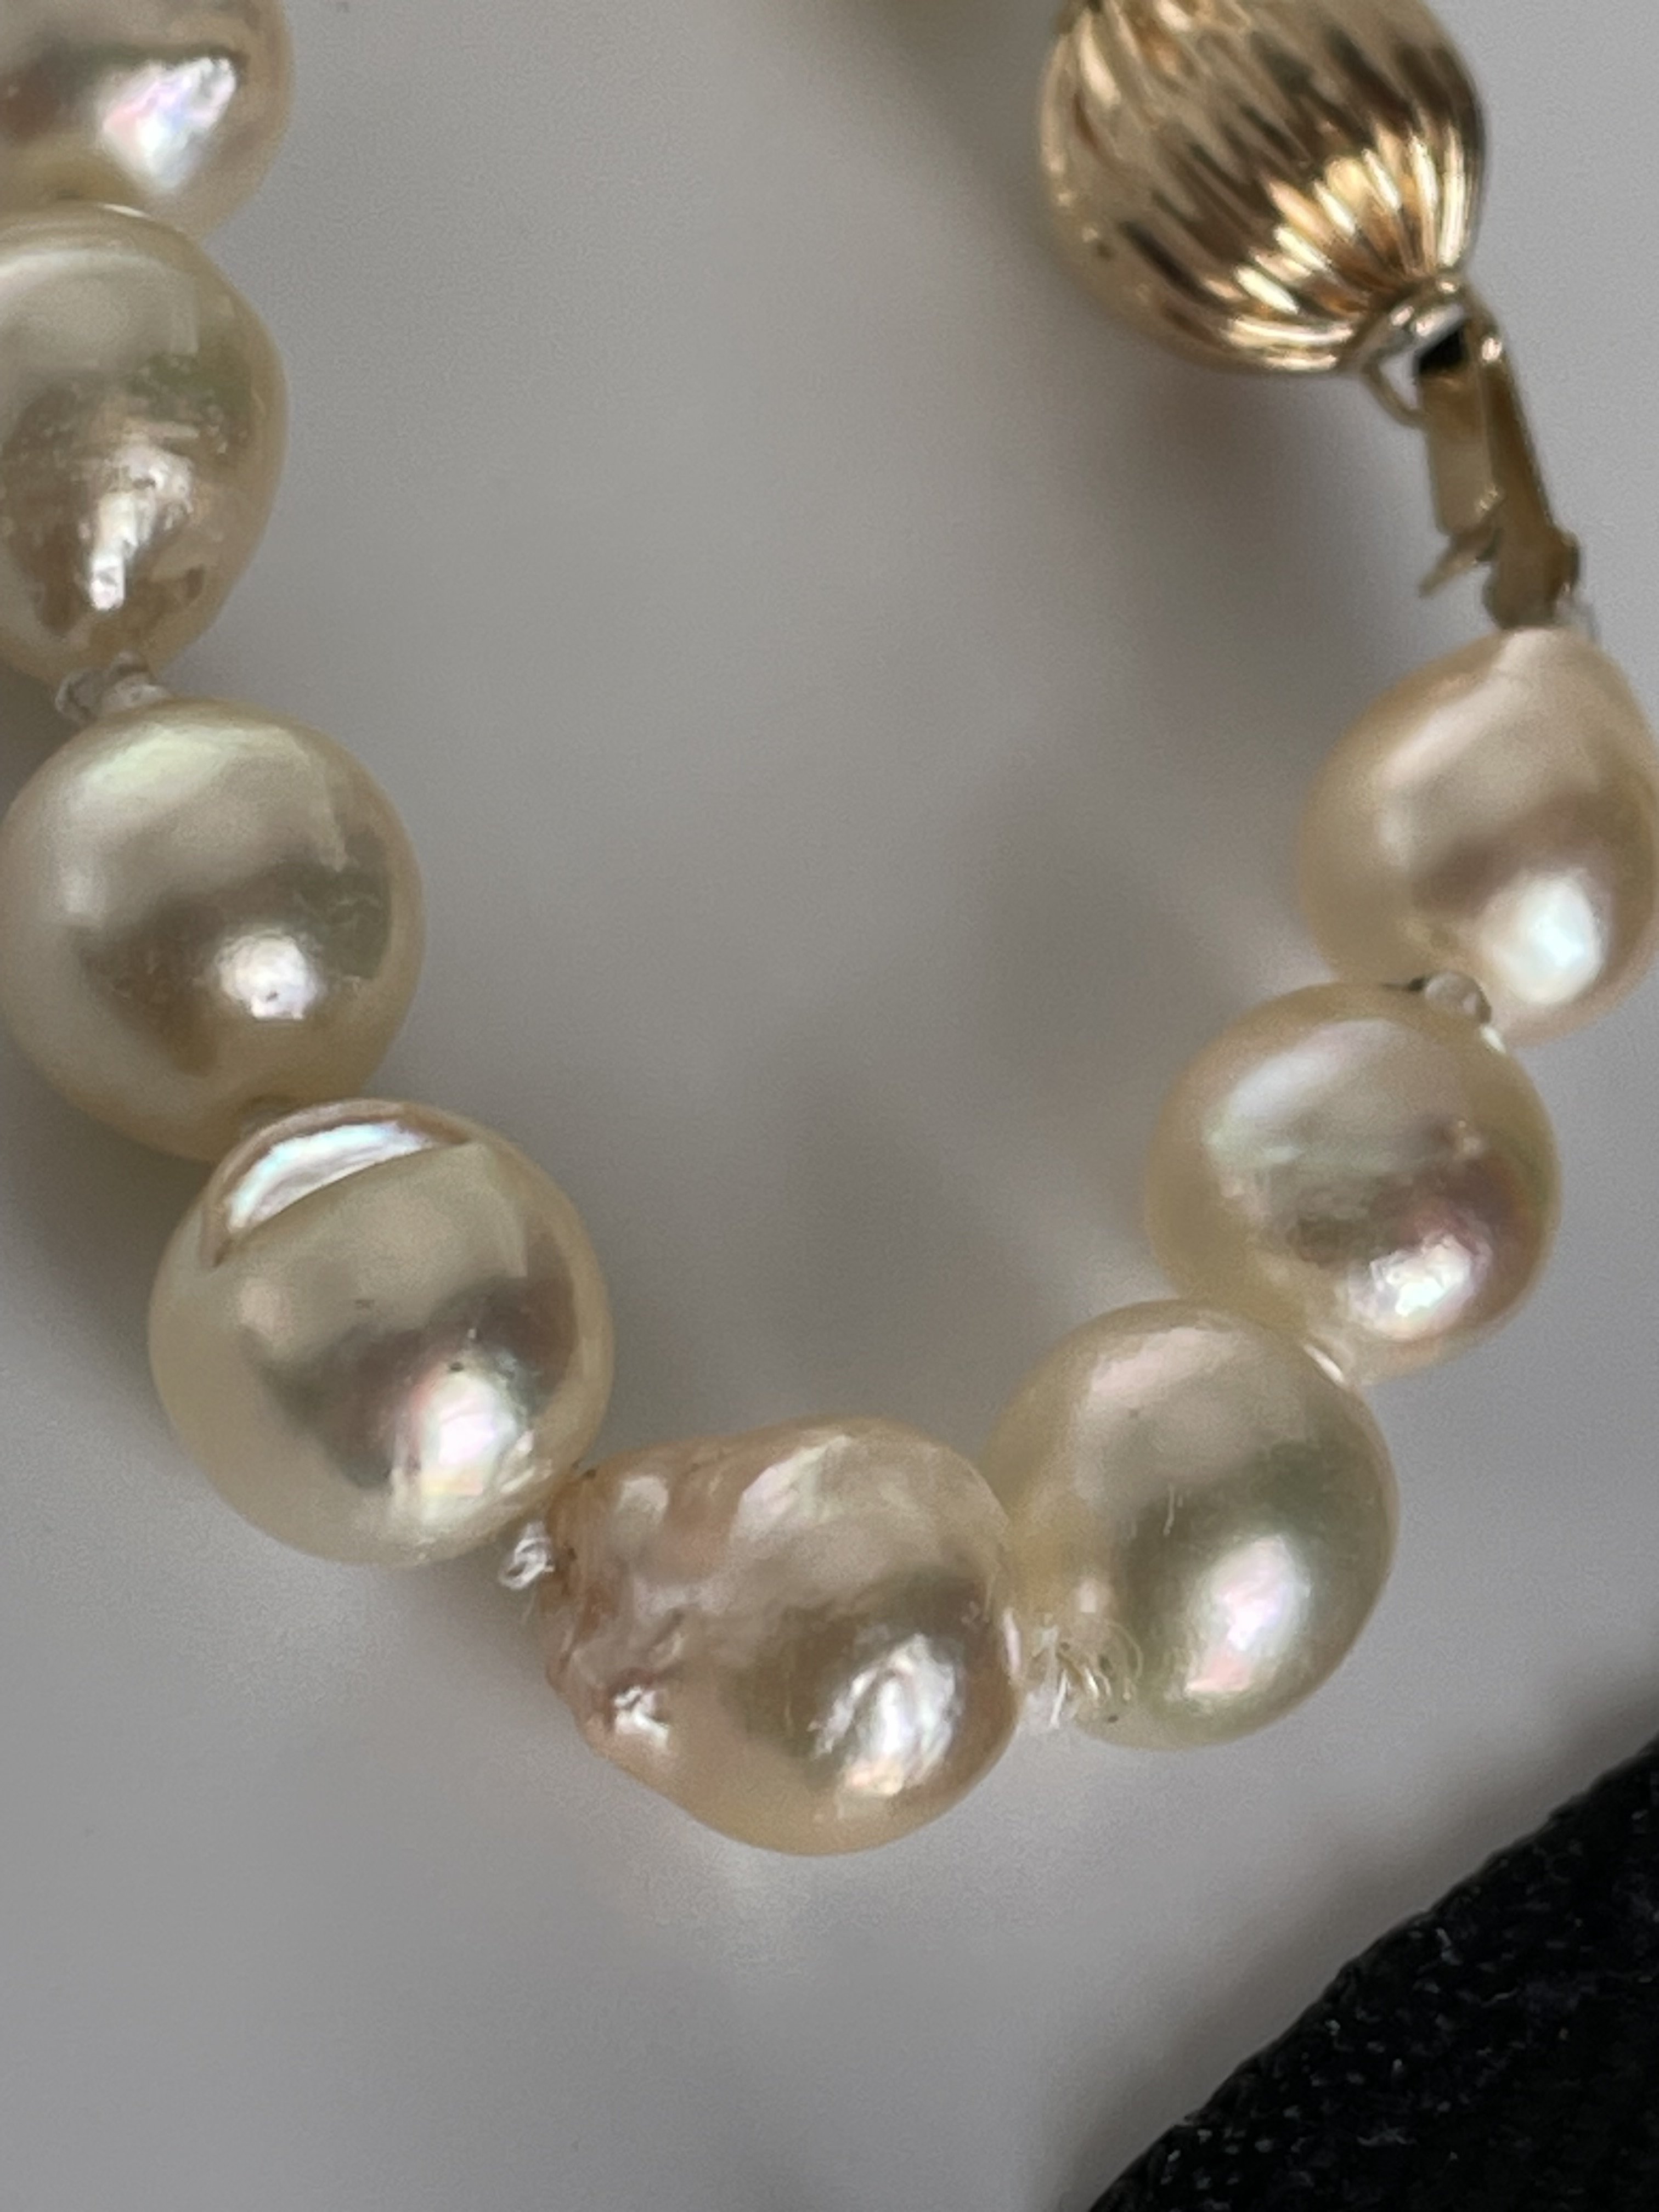 South sea or larger baroque Akoya? | Pearl Education - Pearl-Guide.com